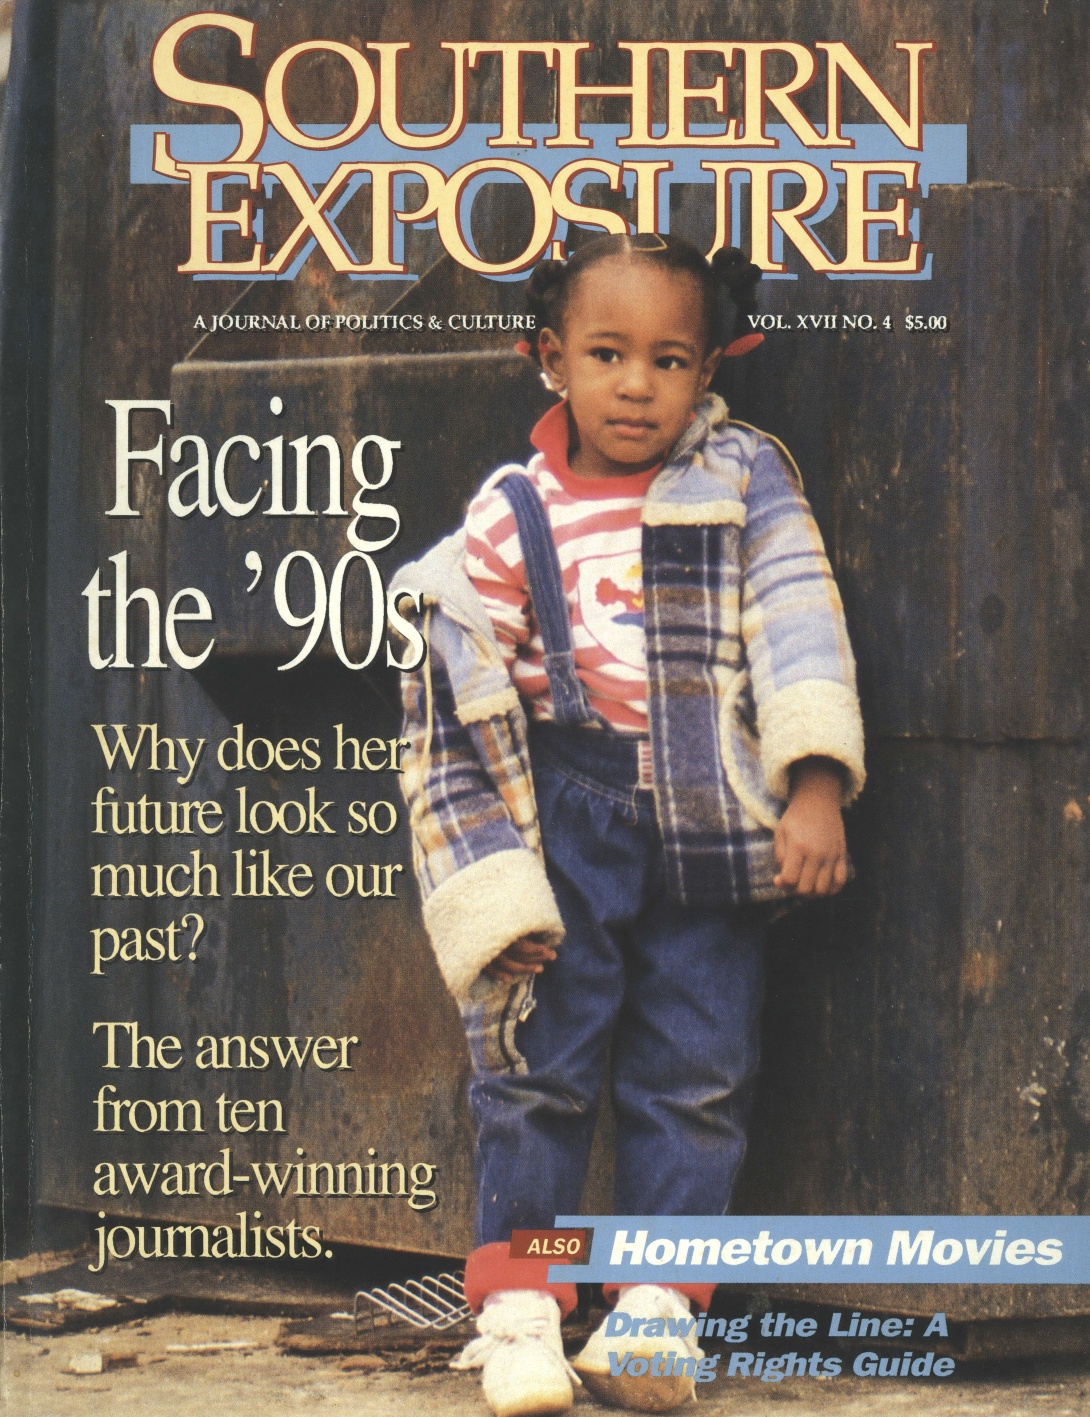 Magazine cover with child facing the camera, reading "Facing the '90s"